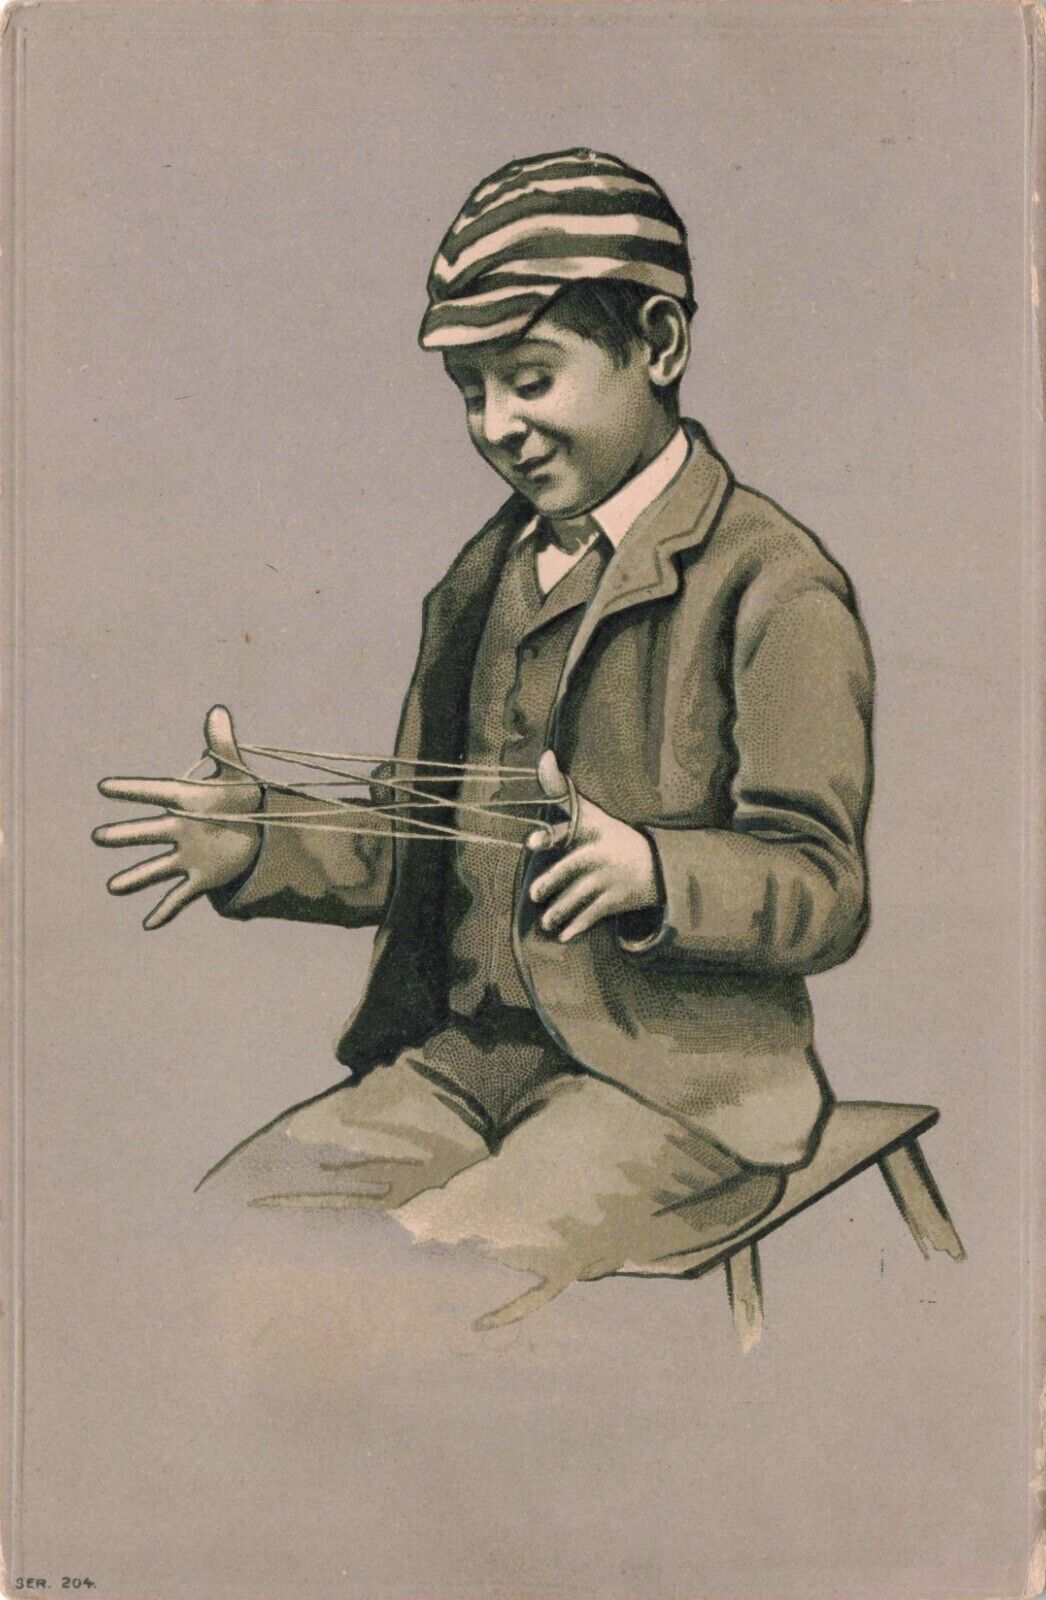 Young Boy Plays Cats Cradle Game with String Series 204 Vintage Postcard